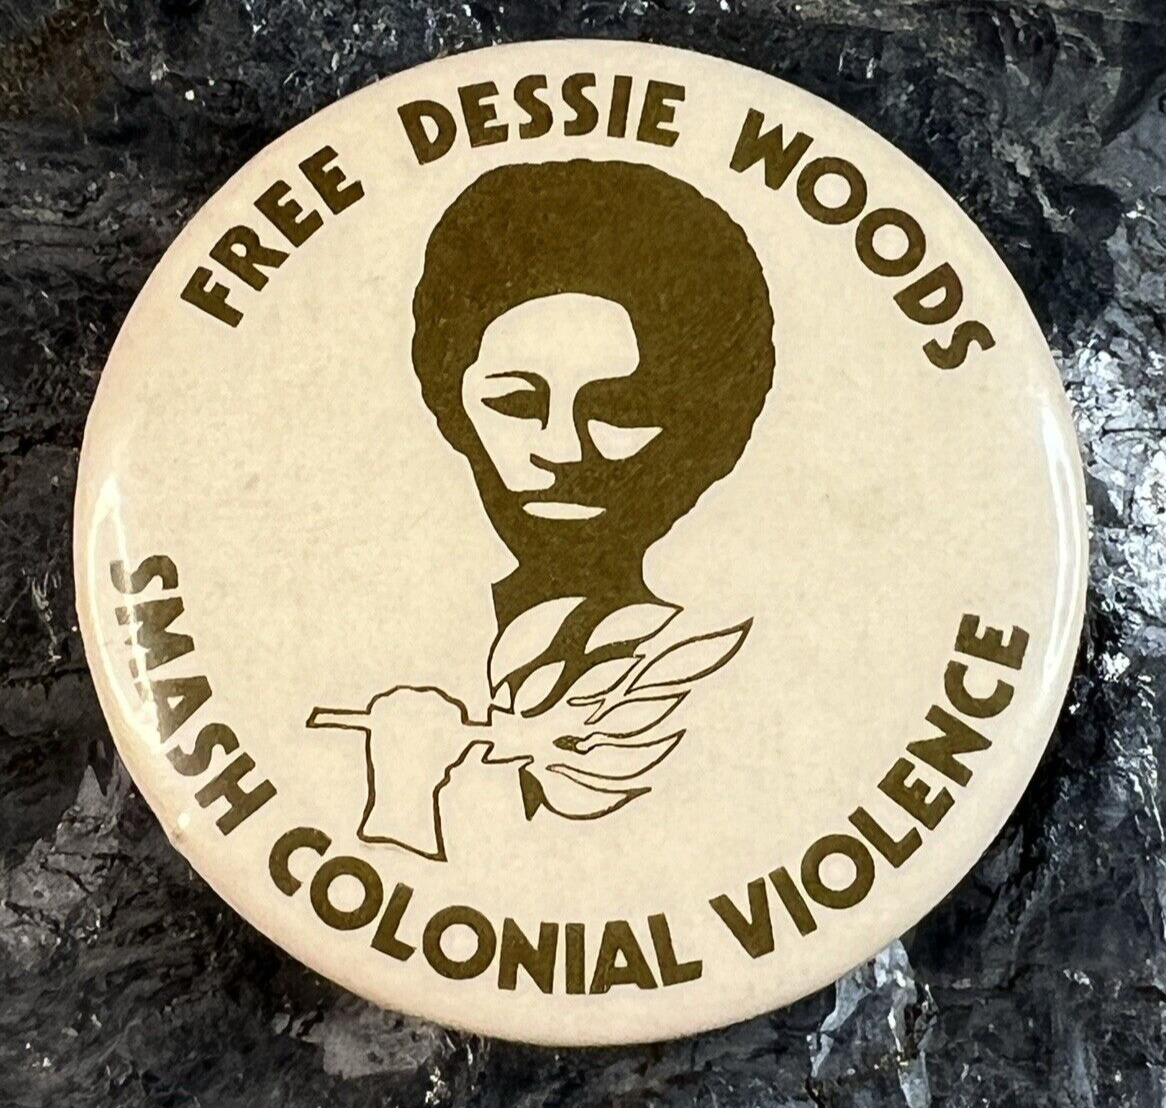 Free Dessie Woods, Smash Colonial Violence 1970s Civil Rights Protest Button Pin